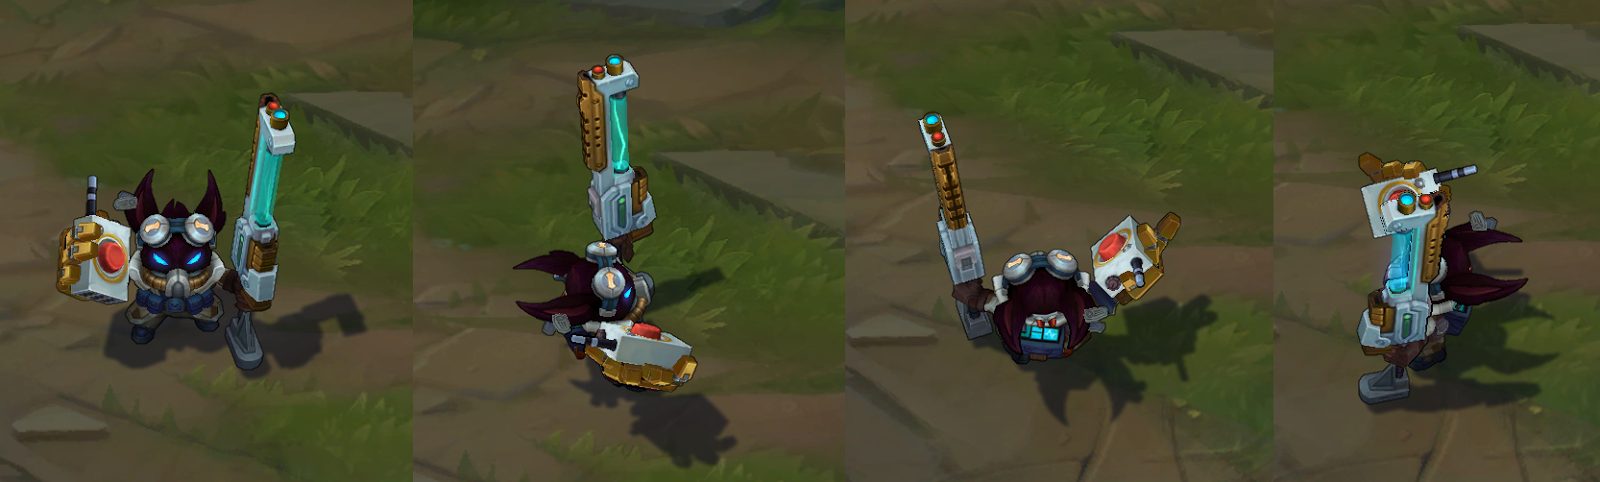 omega squad veigar chroma skin  pack for league of legends ingame picture